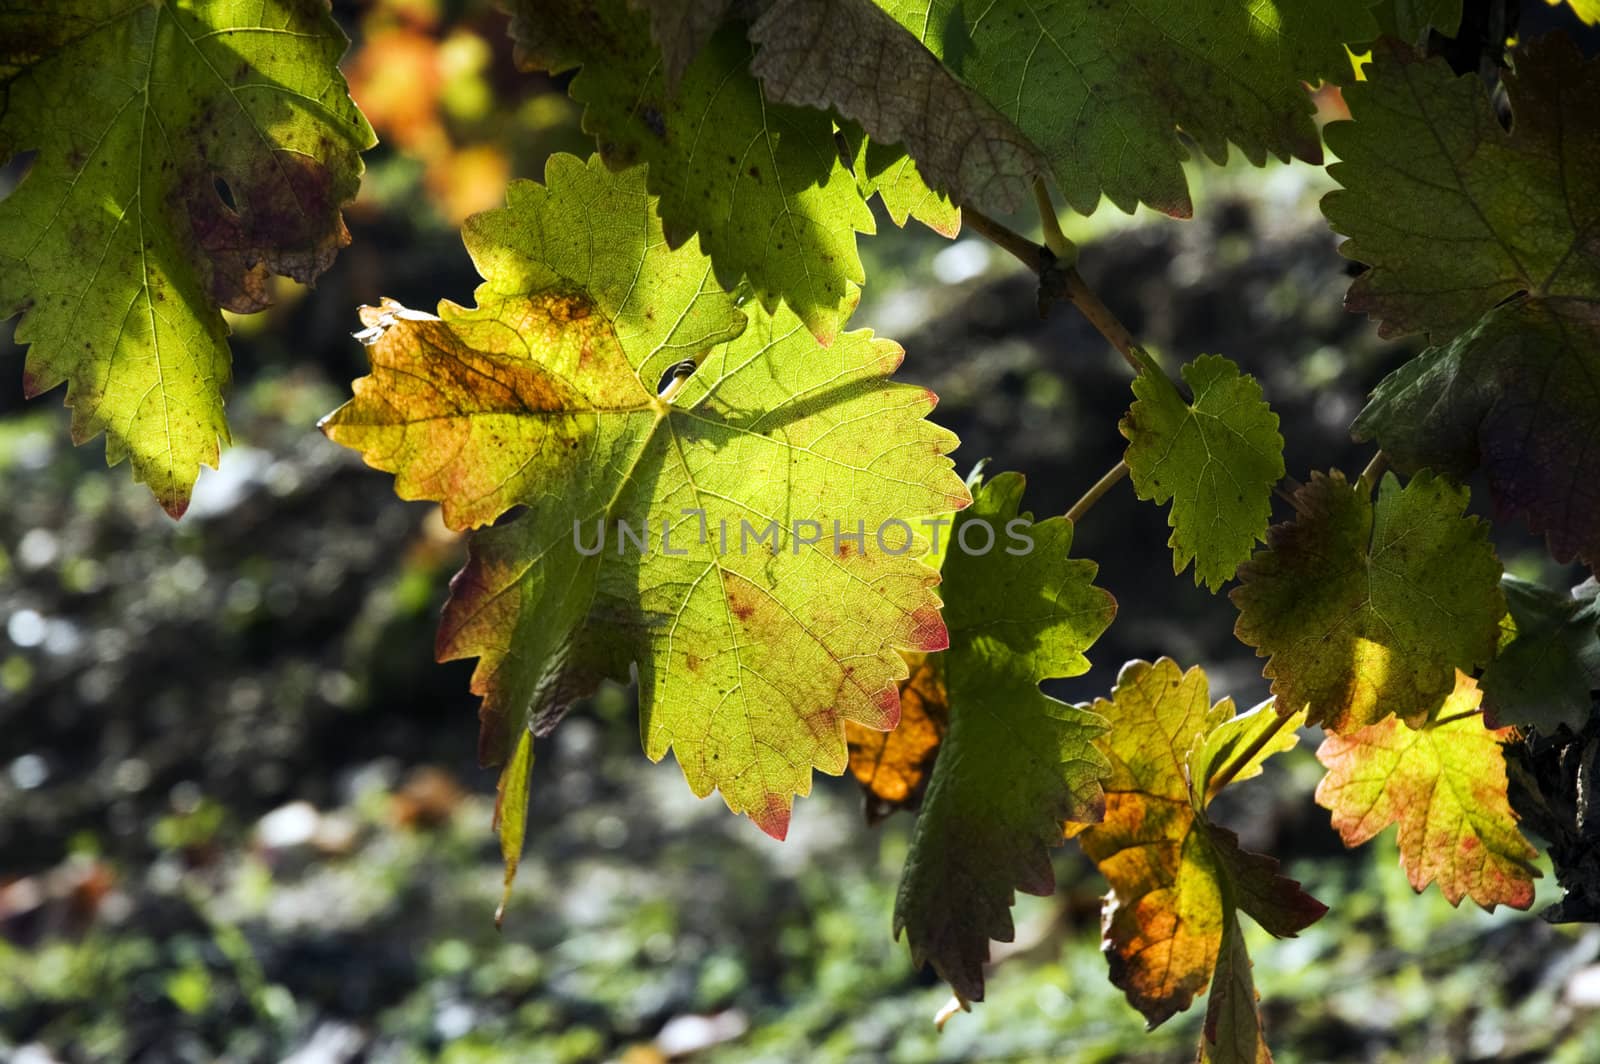 A closeup view of green leaves on a vine, showing signs of autumn colors around the edges.